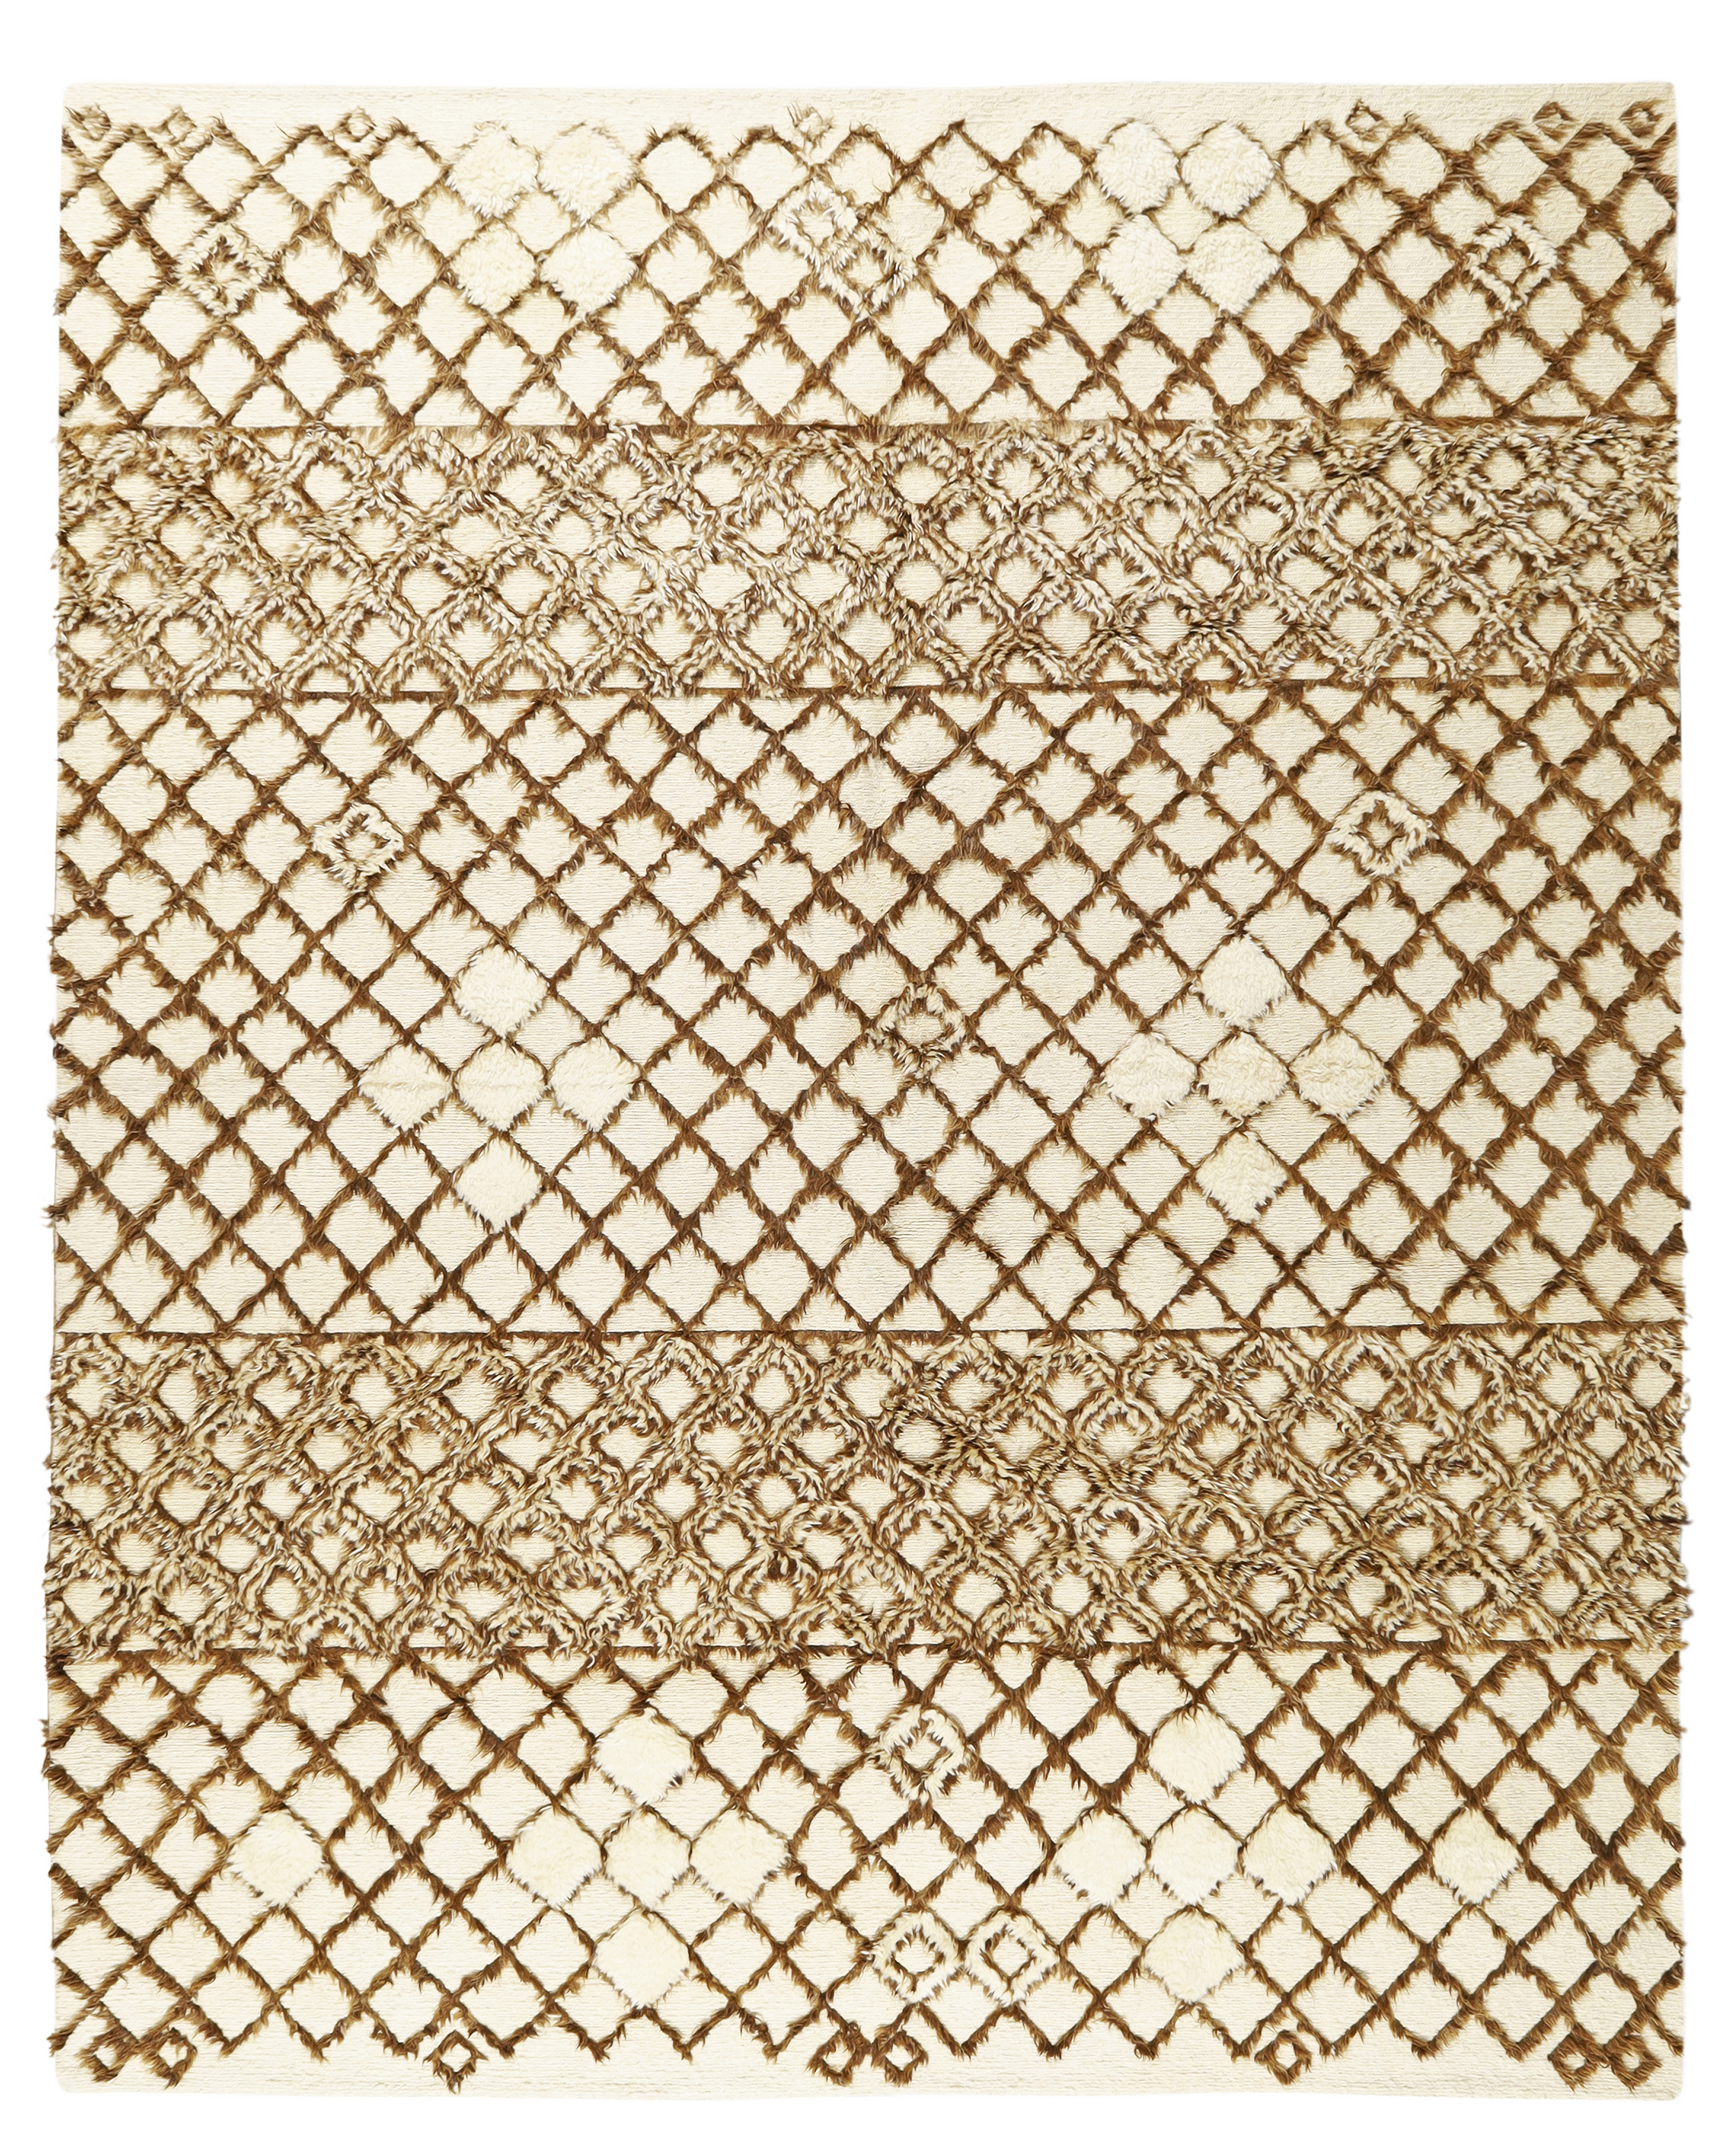 Morrocan Beni Ouarian, a large wool rug, late 20th century, 302cm x 205cm